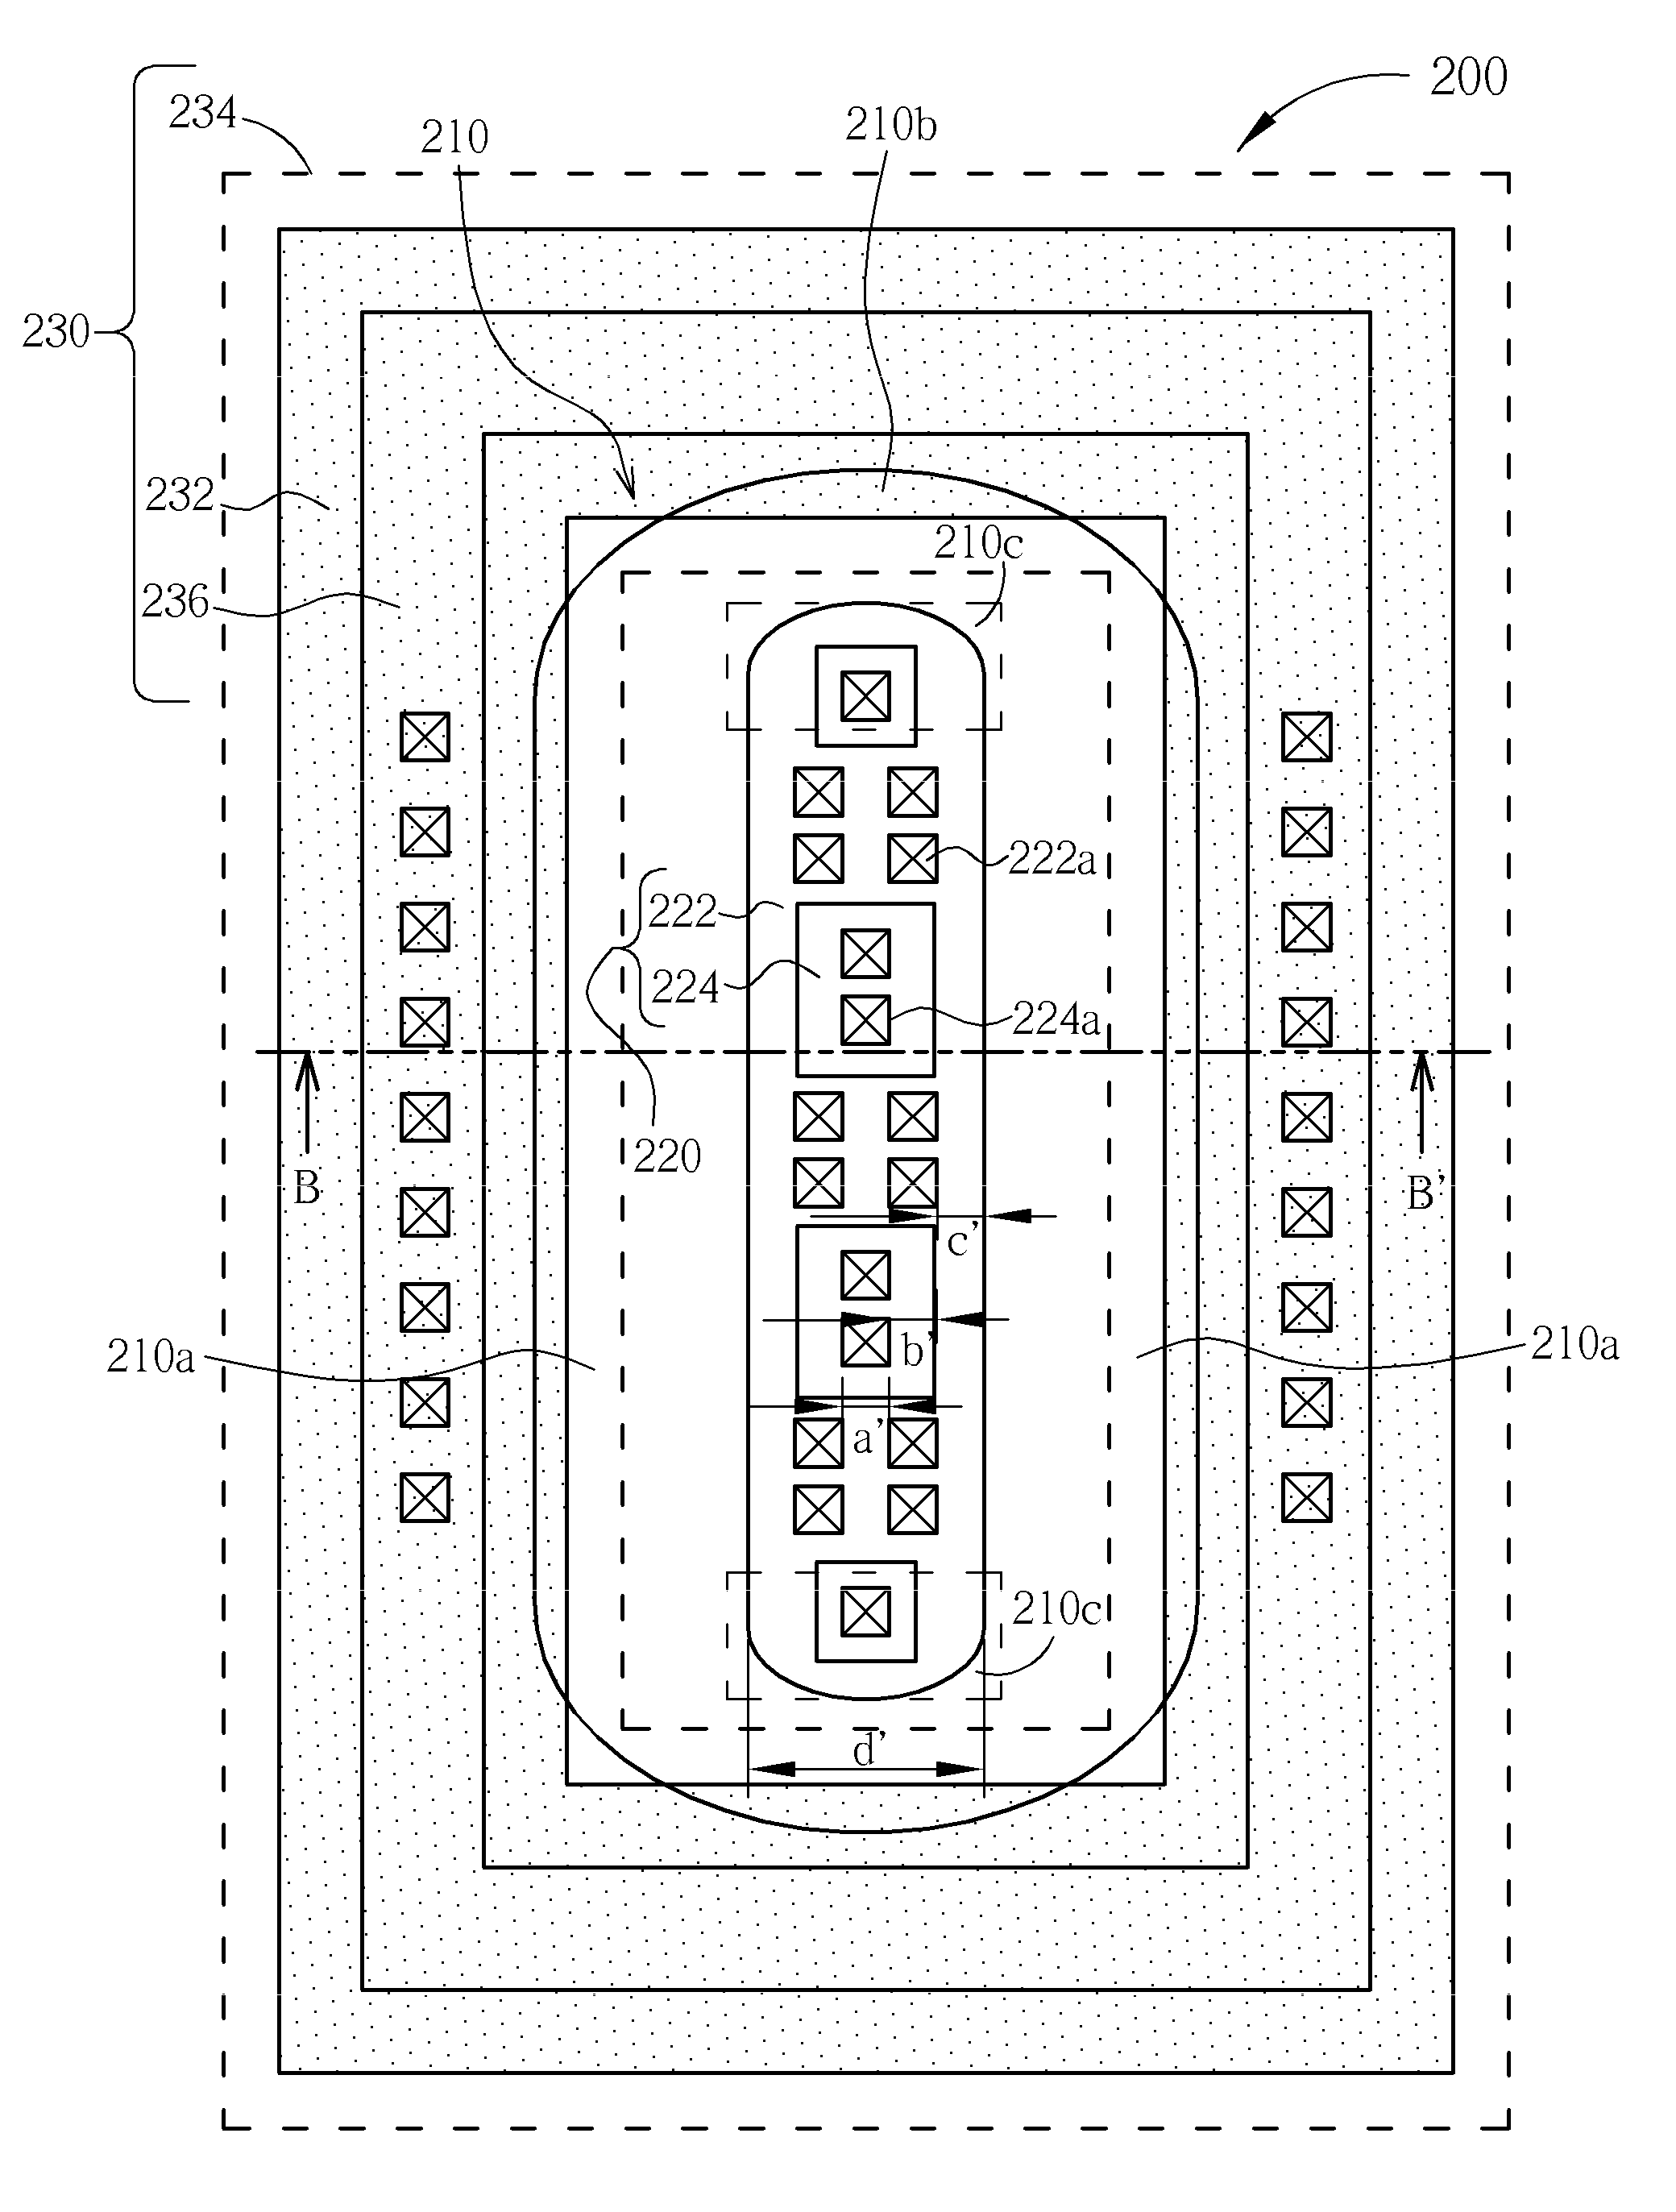 Lateral-diffusion metal-oxide-semiconductor device